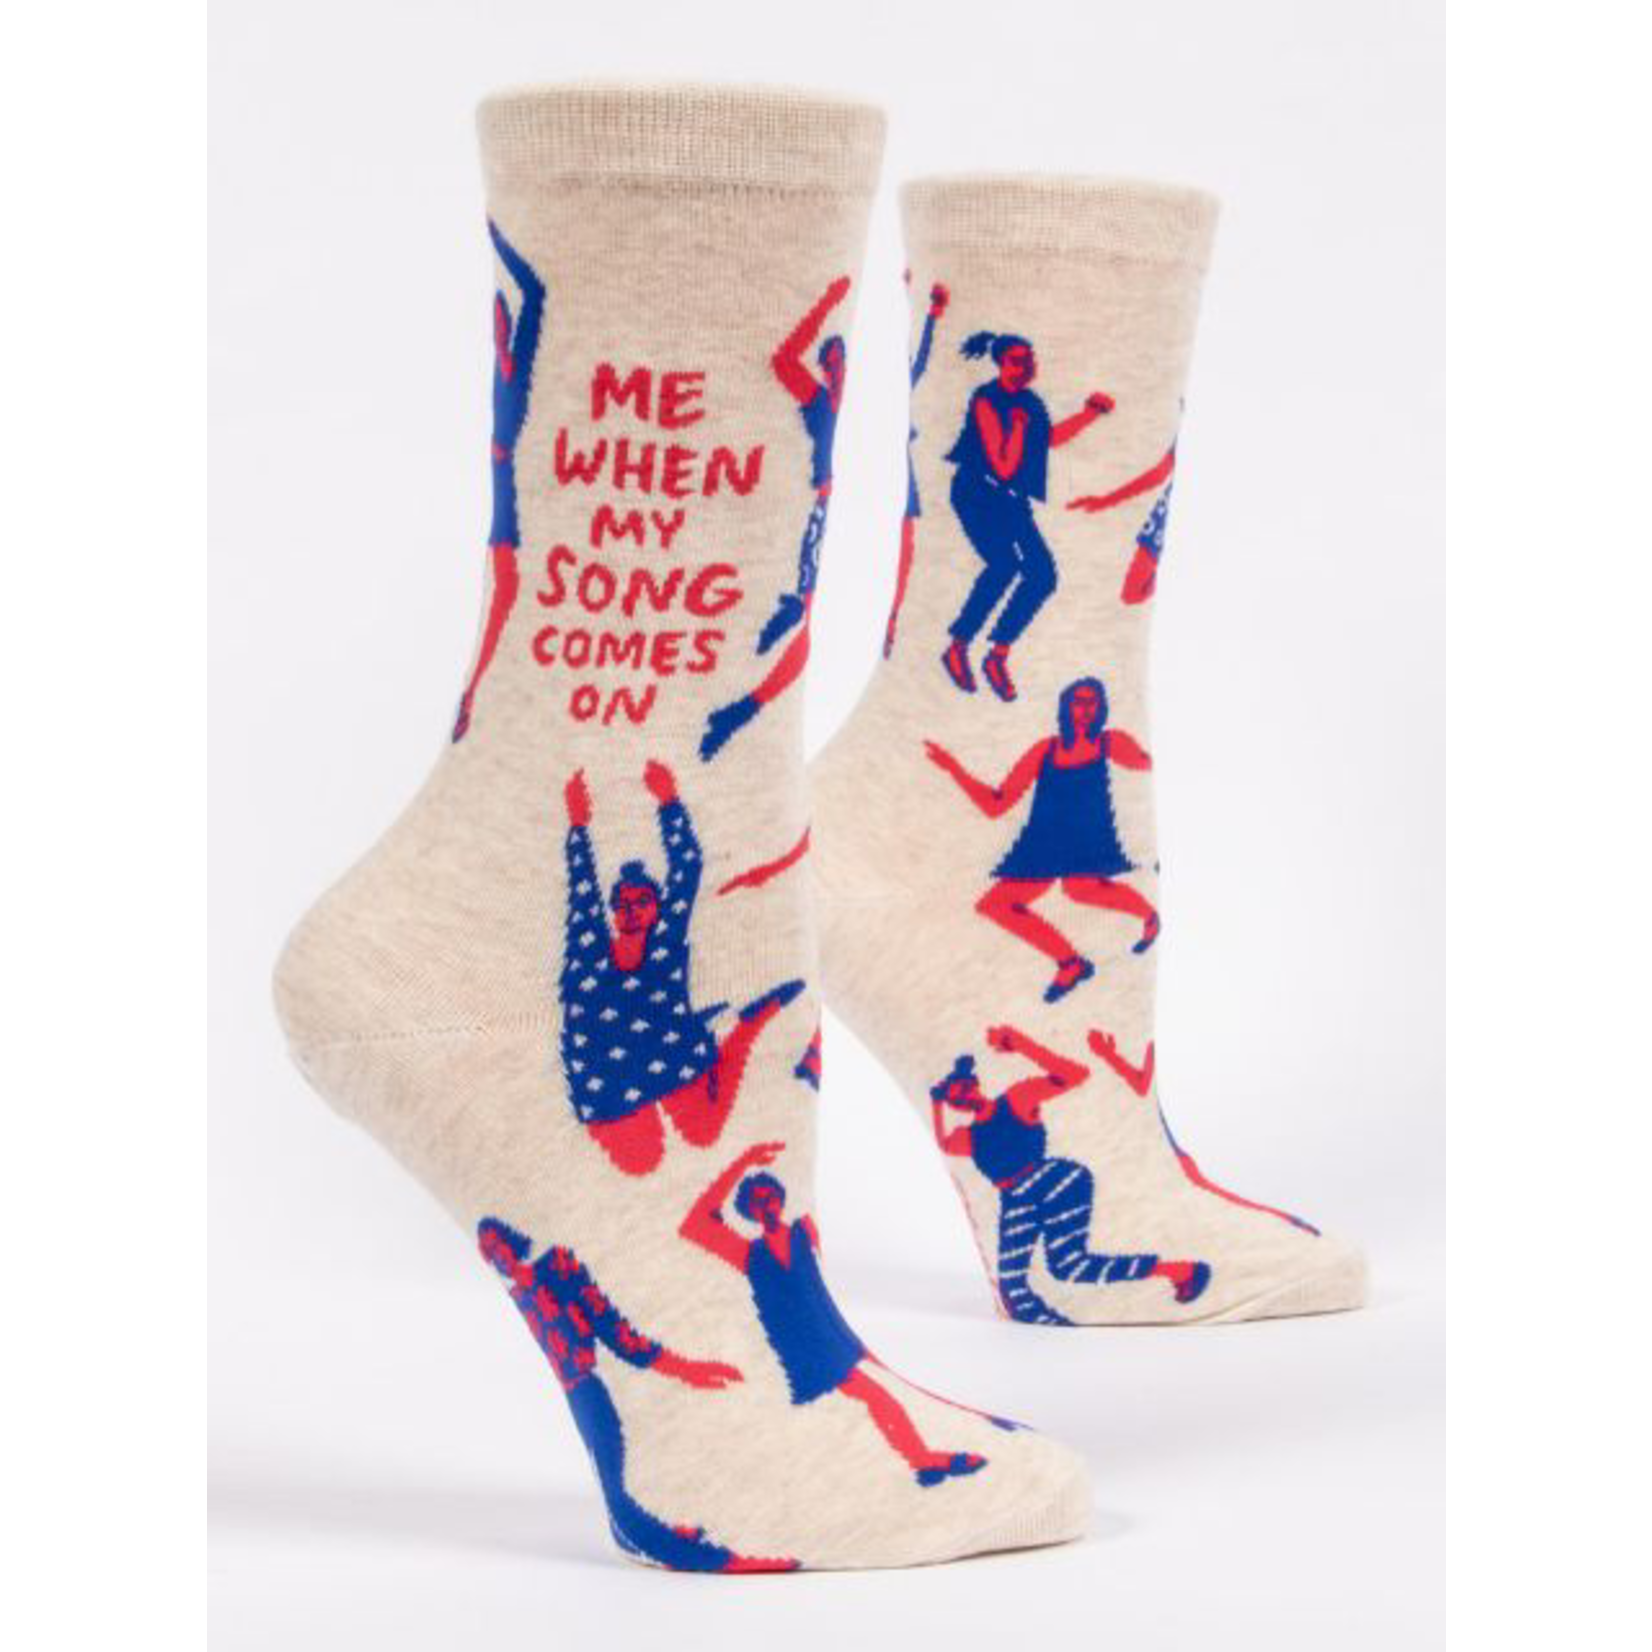 Socks (Womens) - When My Song Comes On